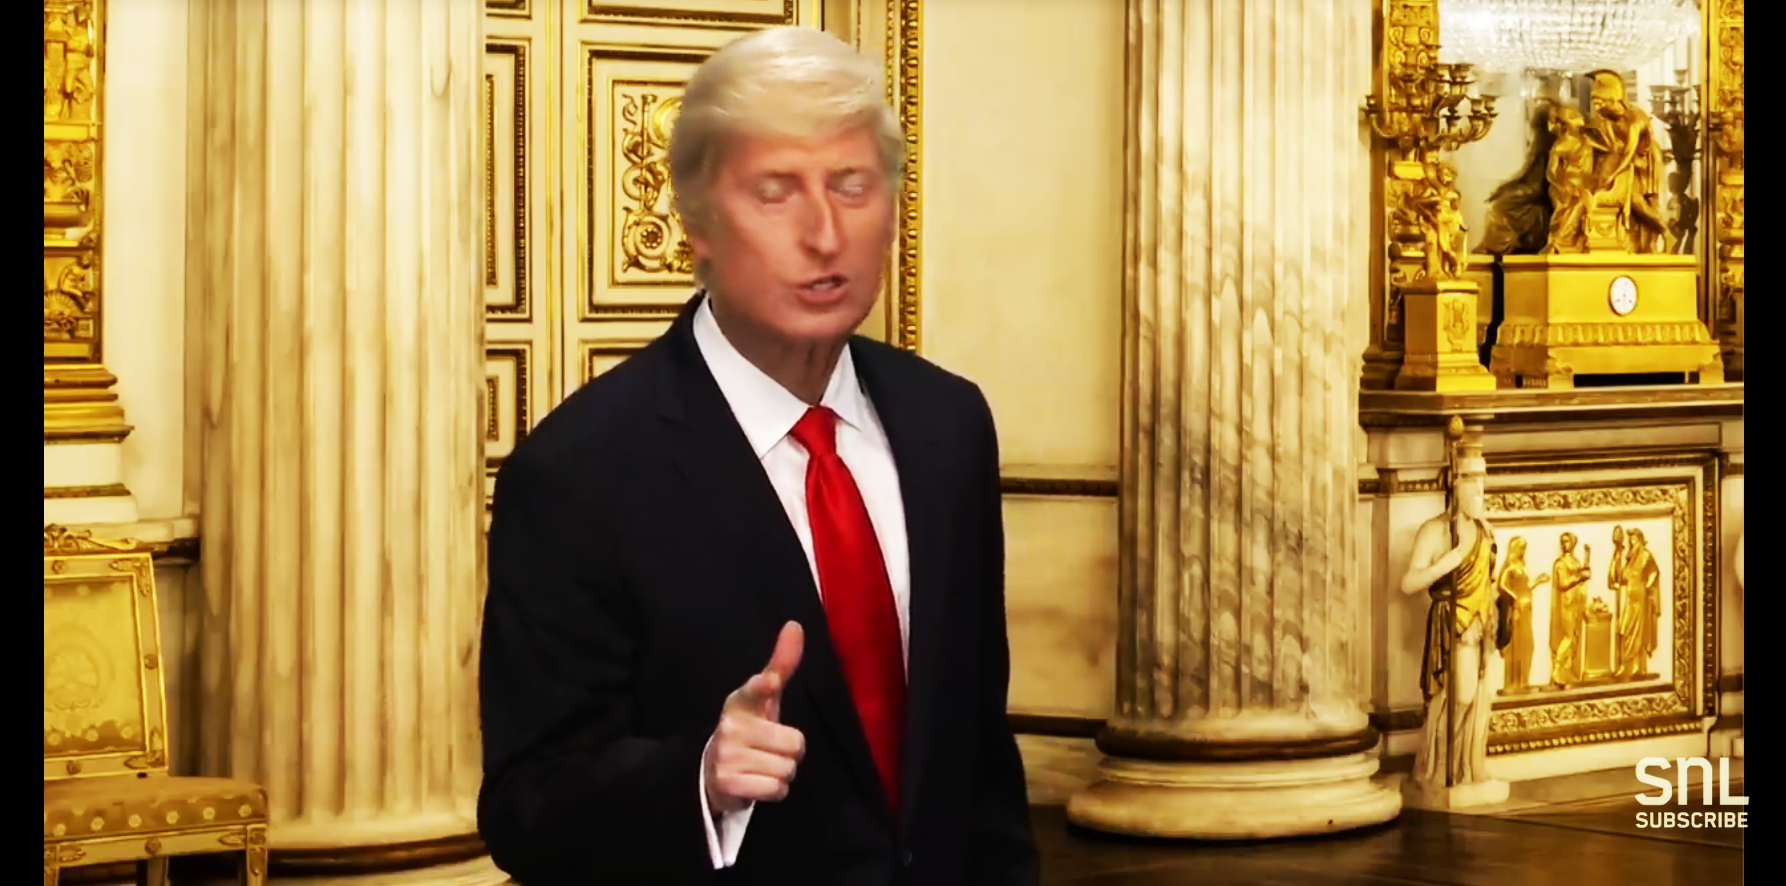 ‘saturday Night Live Tackles The Trump Indictment With 2 Skits Rose Law Group Reporter 